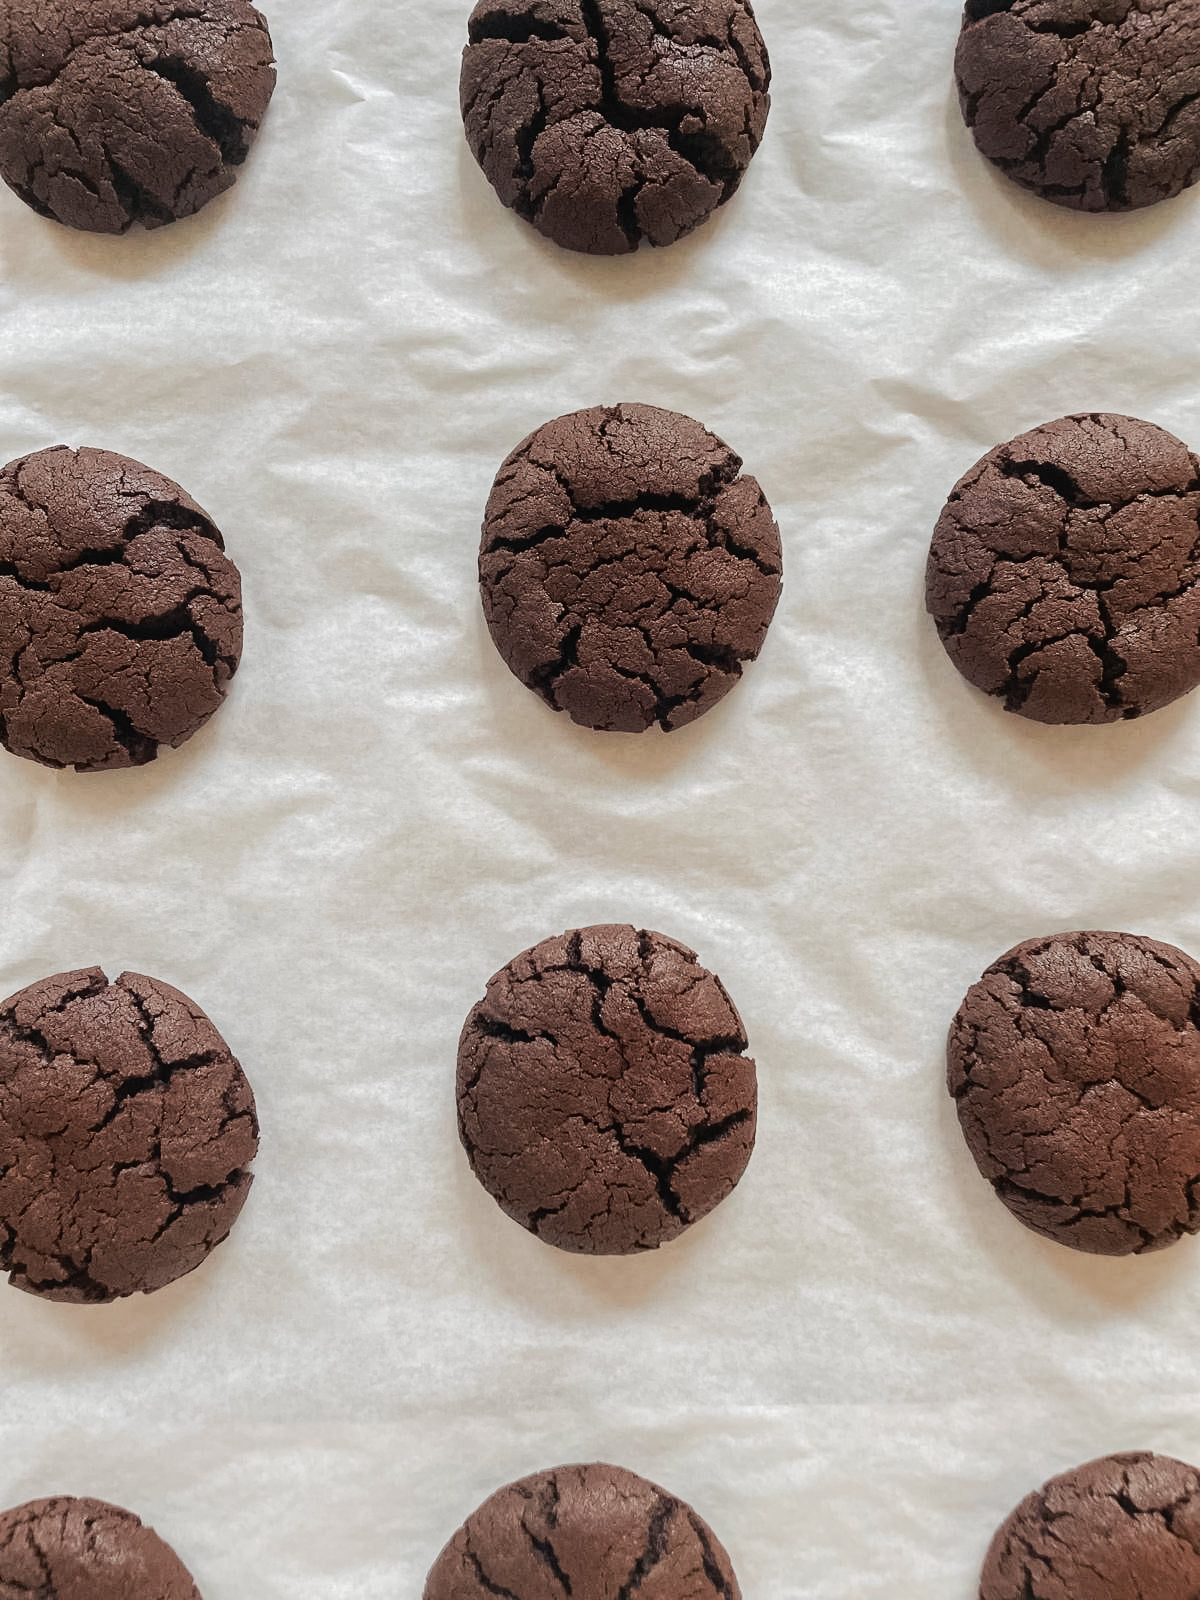 Limited Edition: Lunar Cookie Chocolate – as featured in Annalisa Barbieri&